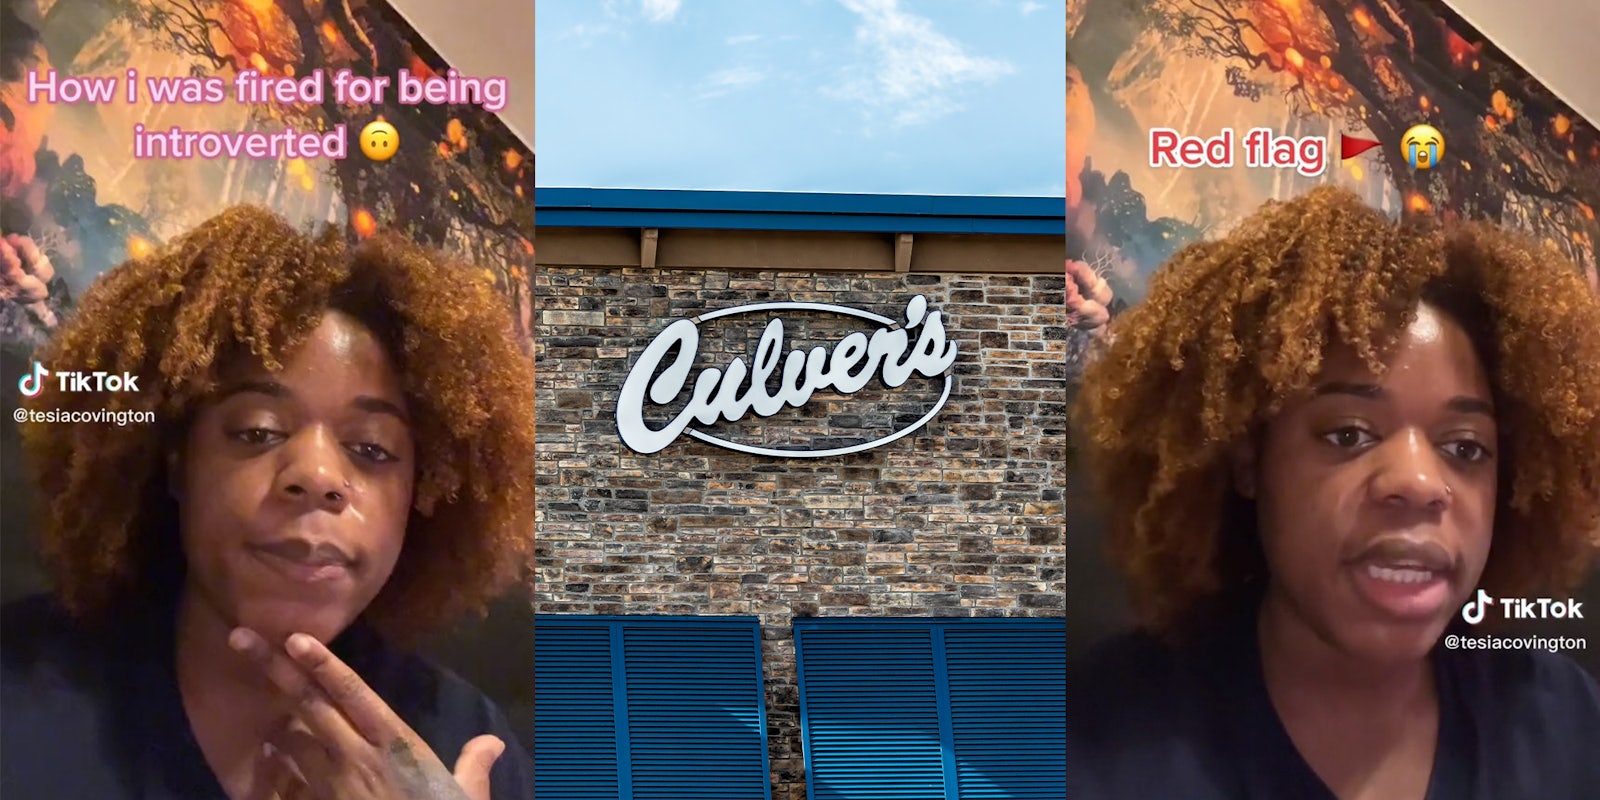 Worker says she was fired from Culver's for being an introvert